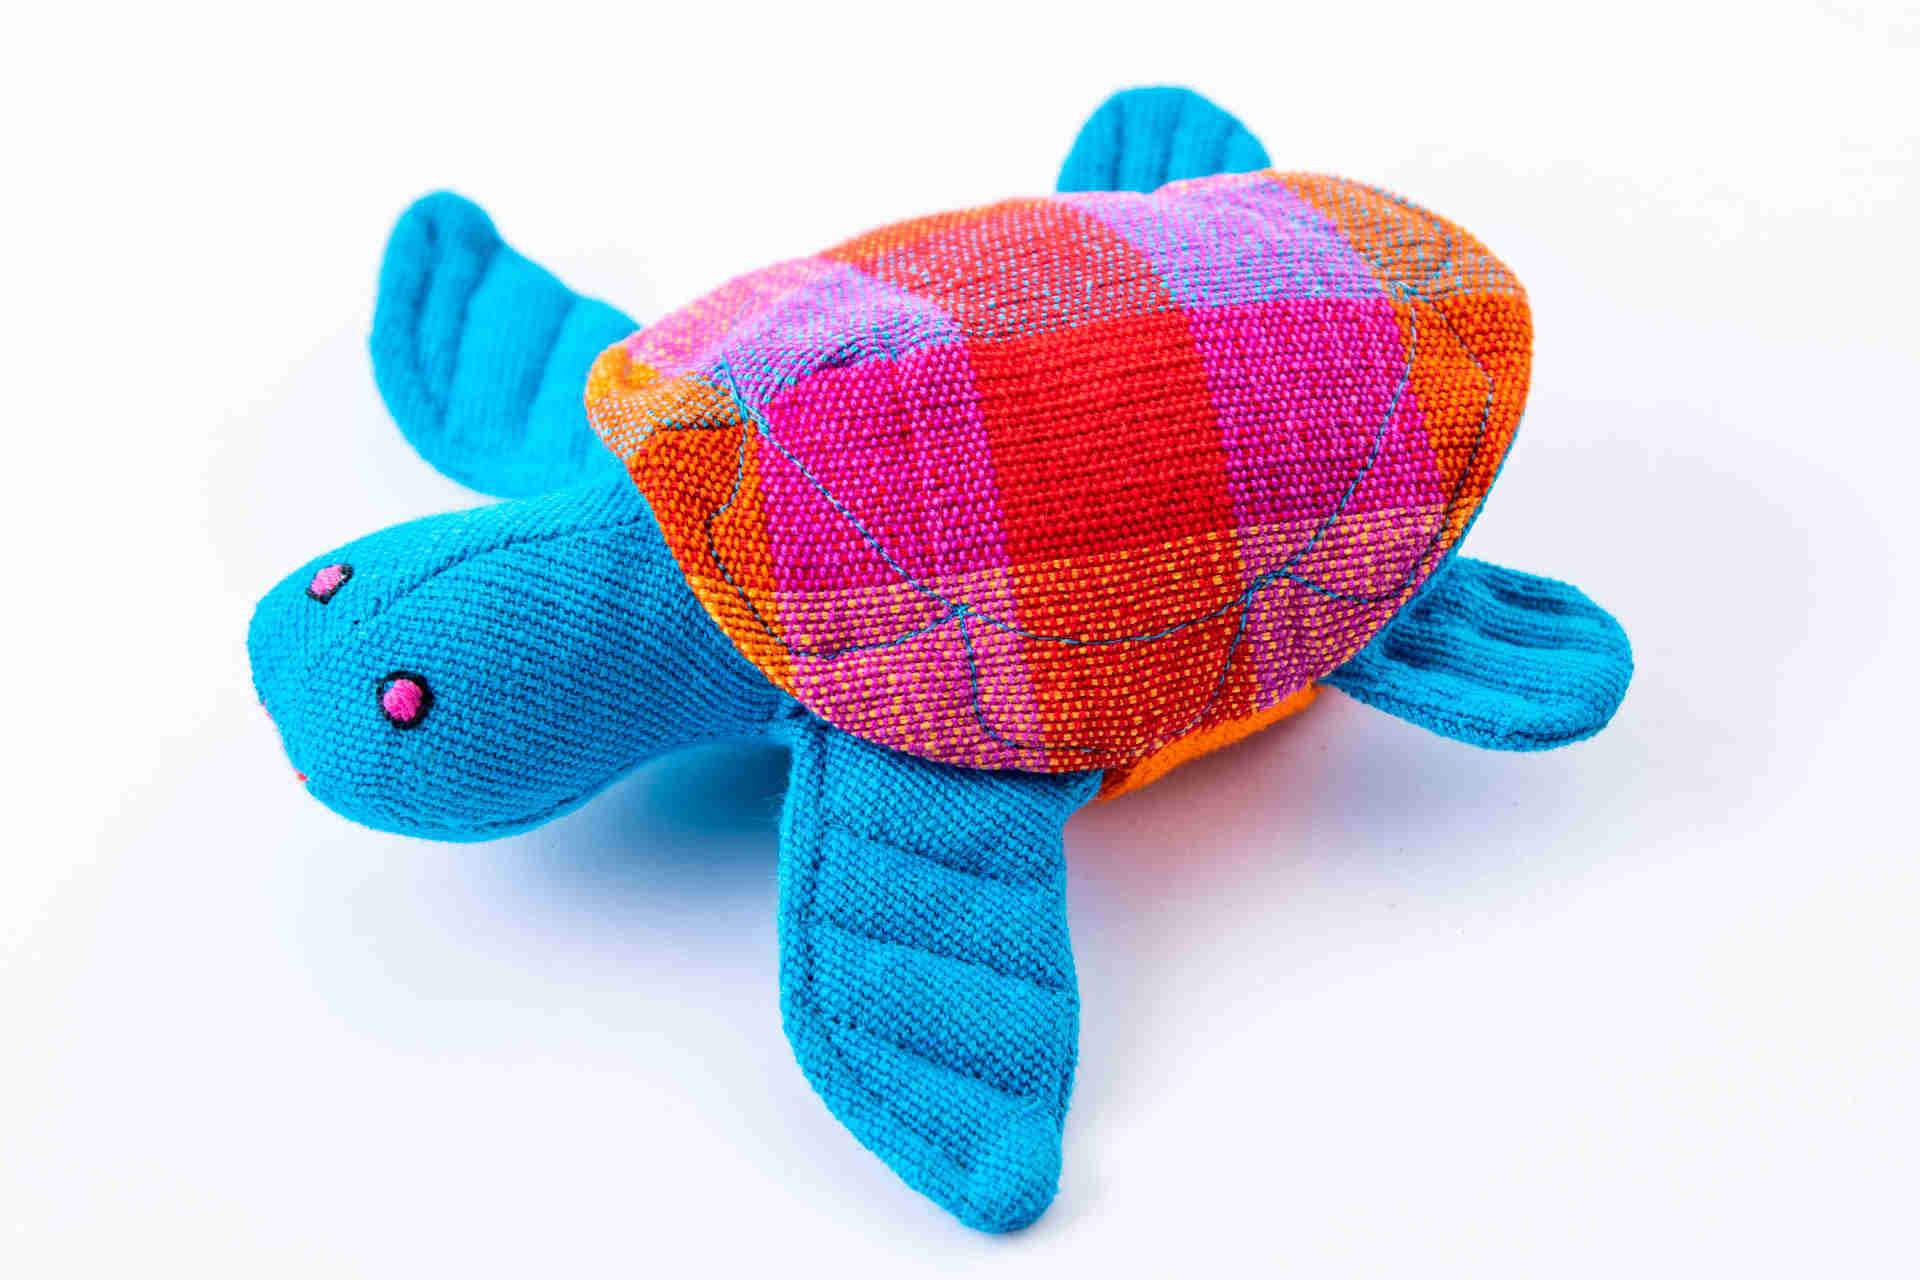 sustainable ethical handmade handloom slow-fashion Stuffed Animals Stuffed Animal Toys - Handmade Natural Cotton Fabric and Safety Tested | Turtle made in sri lanka 